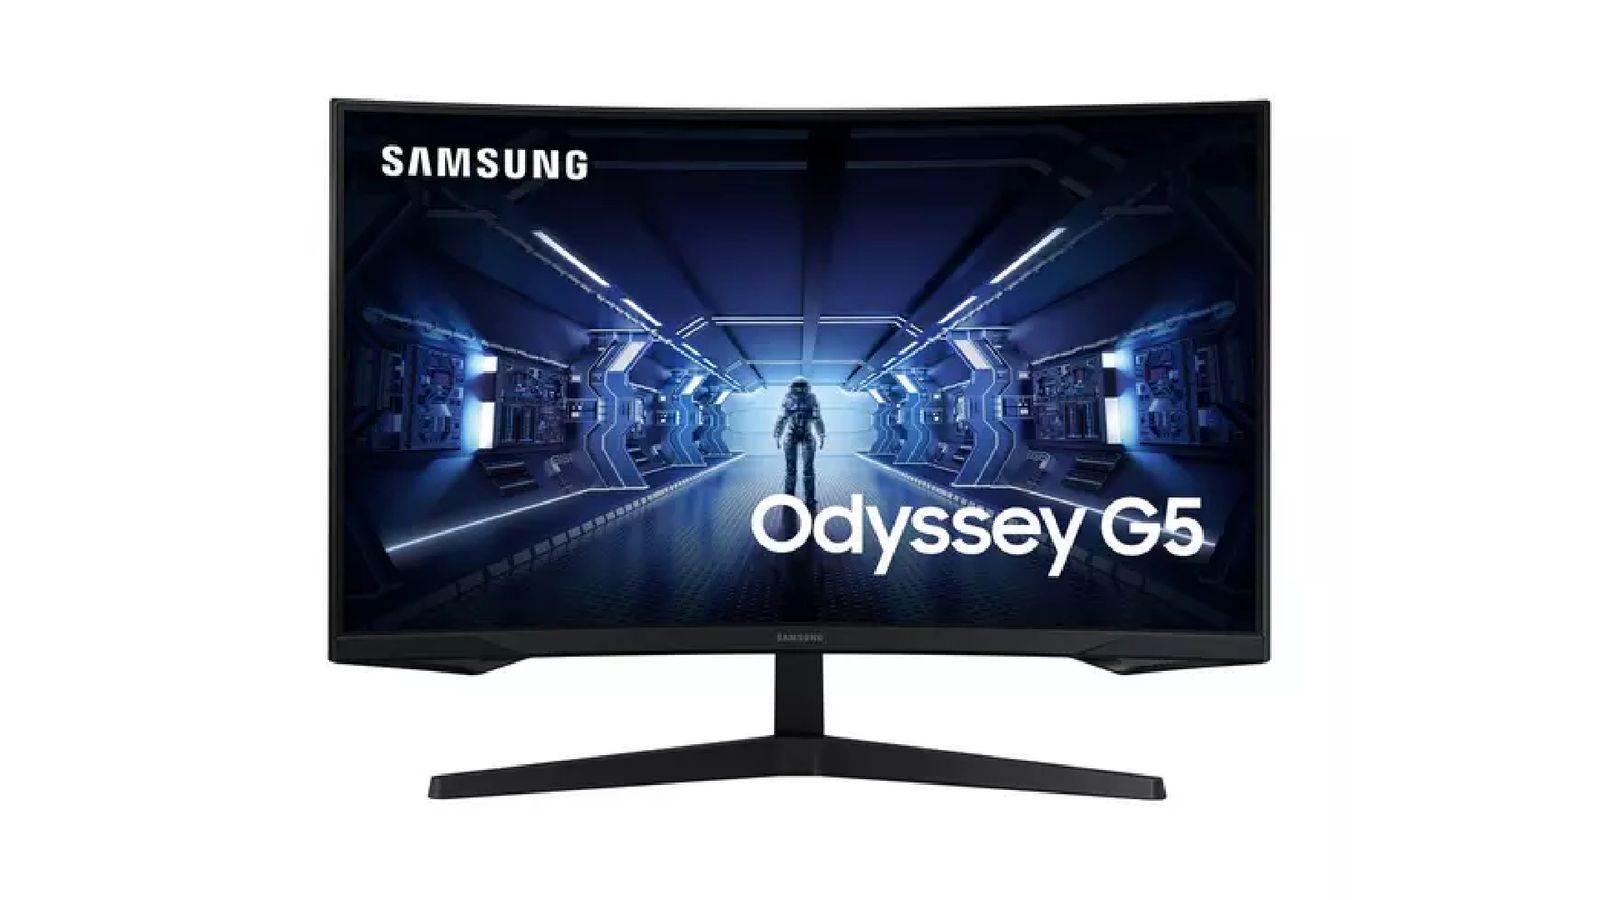 Samsung Odyssey G5 product image of a black monitor with a Sci-Fi tunnel on the display with someone walking through it.